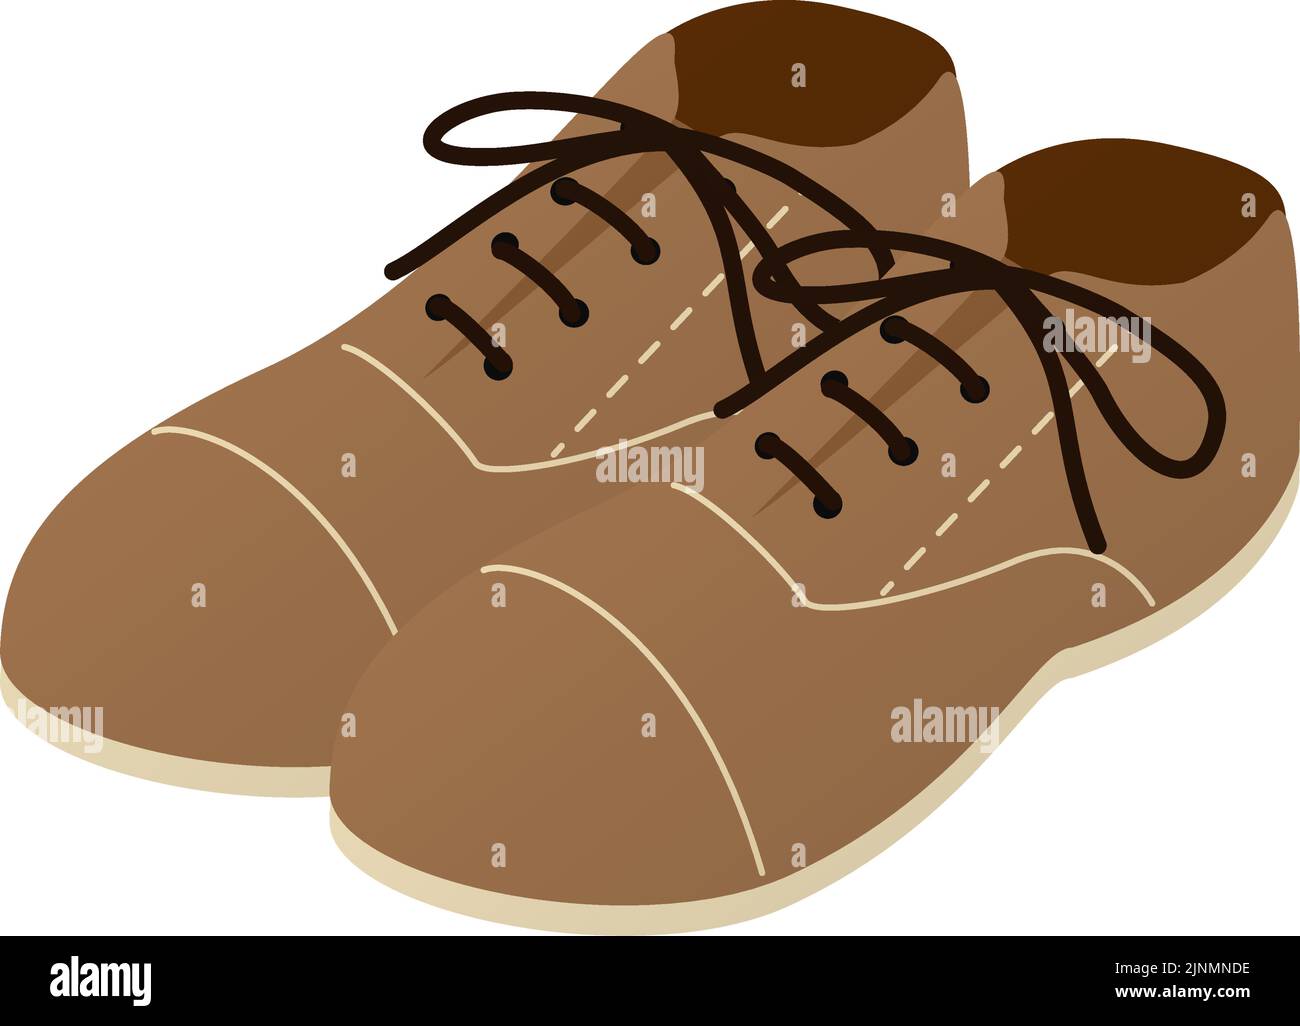 Illustration of brown leather shoes Stock Vector